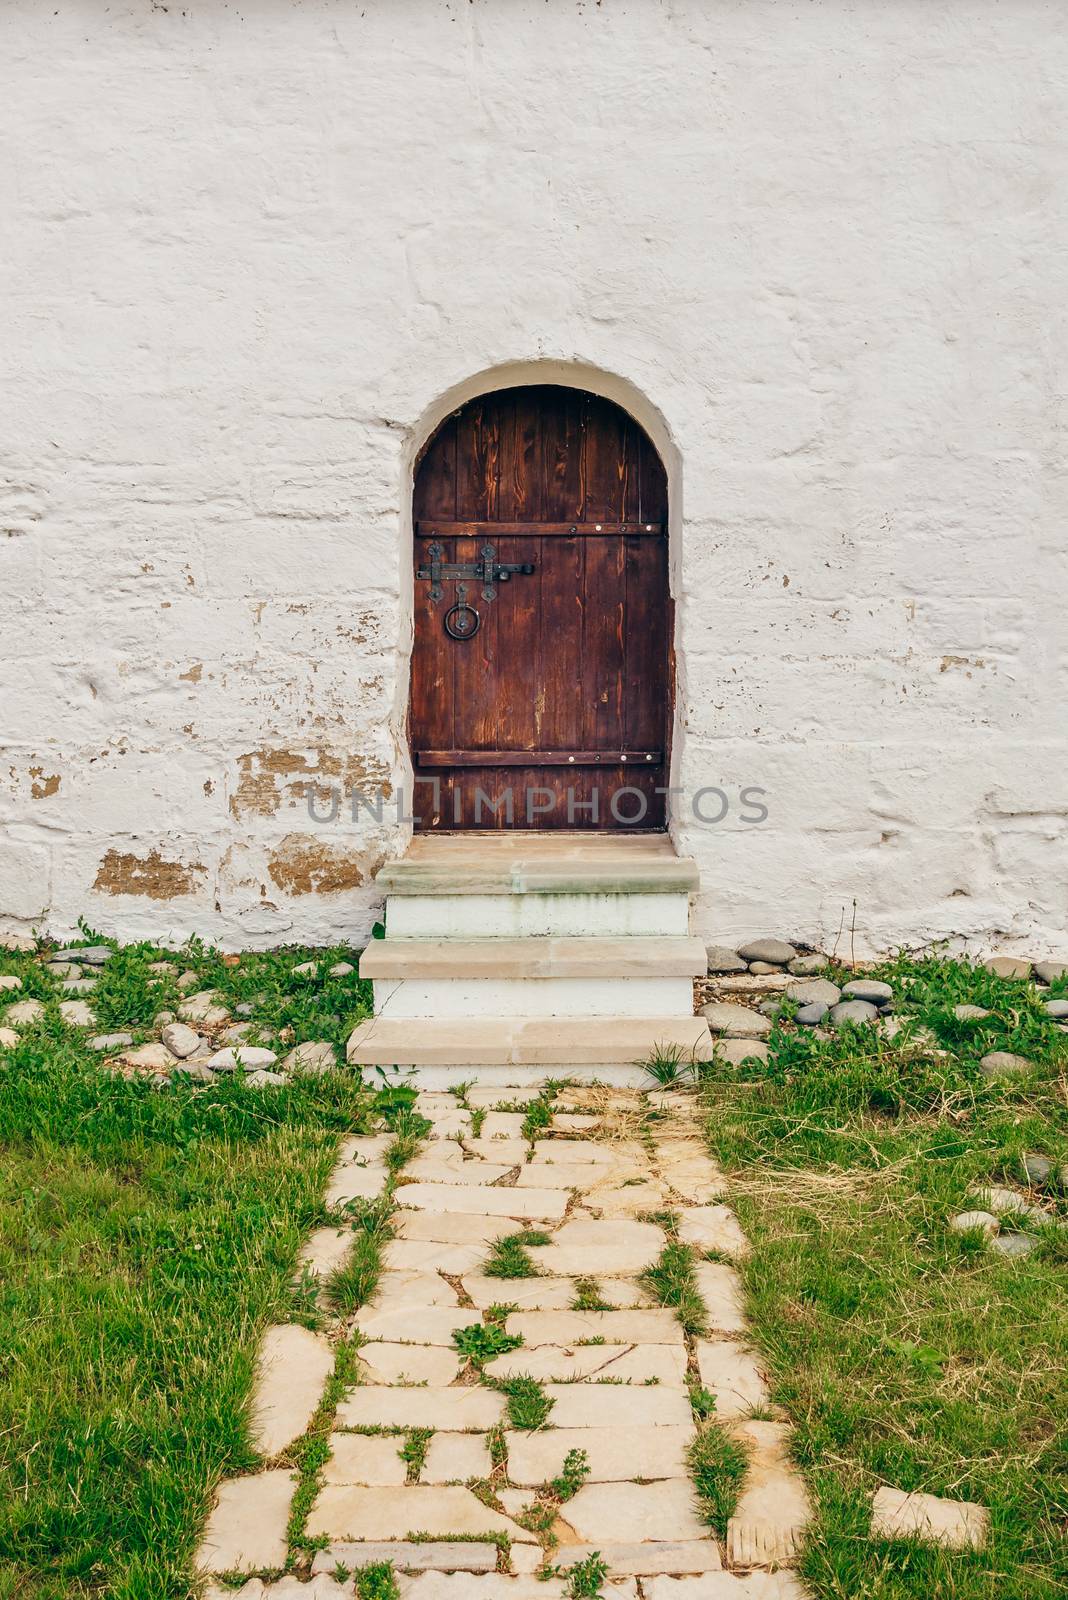 Old, Brown, Wooden Door on White Brick Wall with Stone Path and Grass